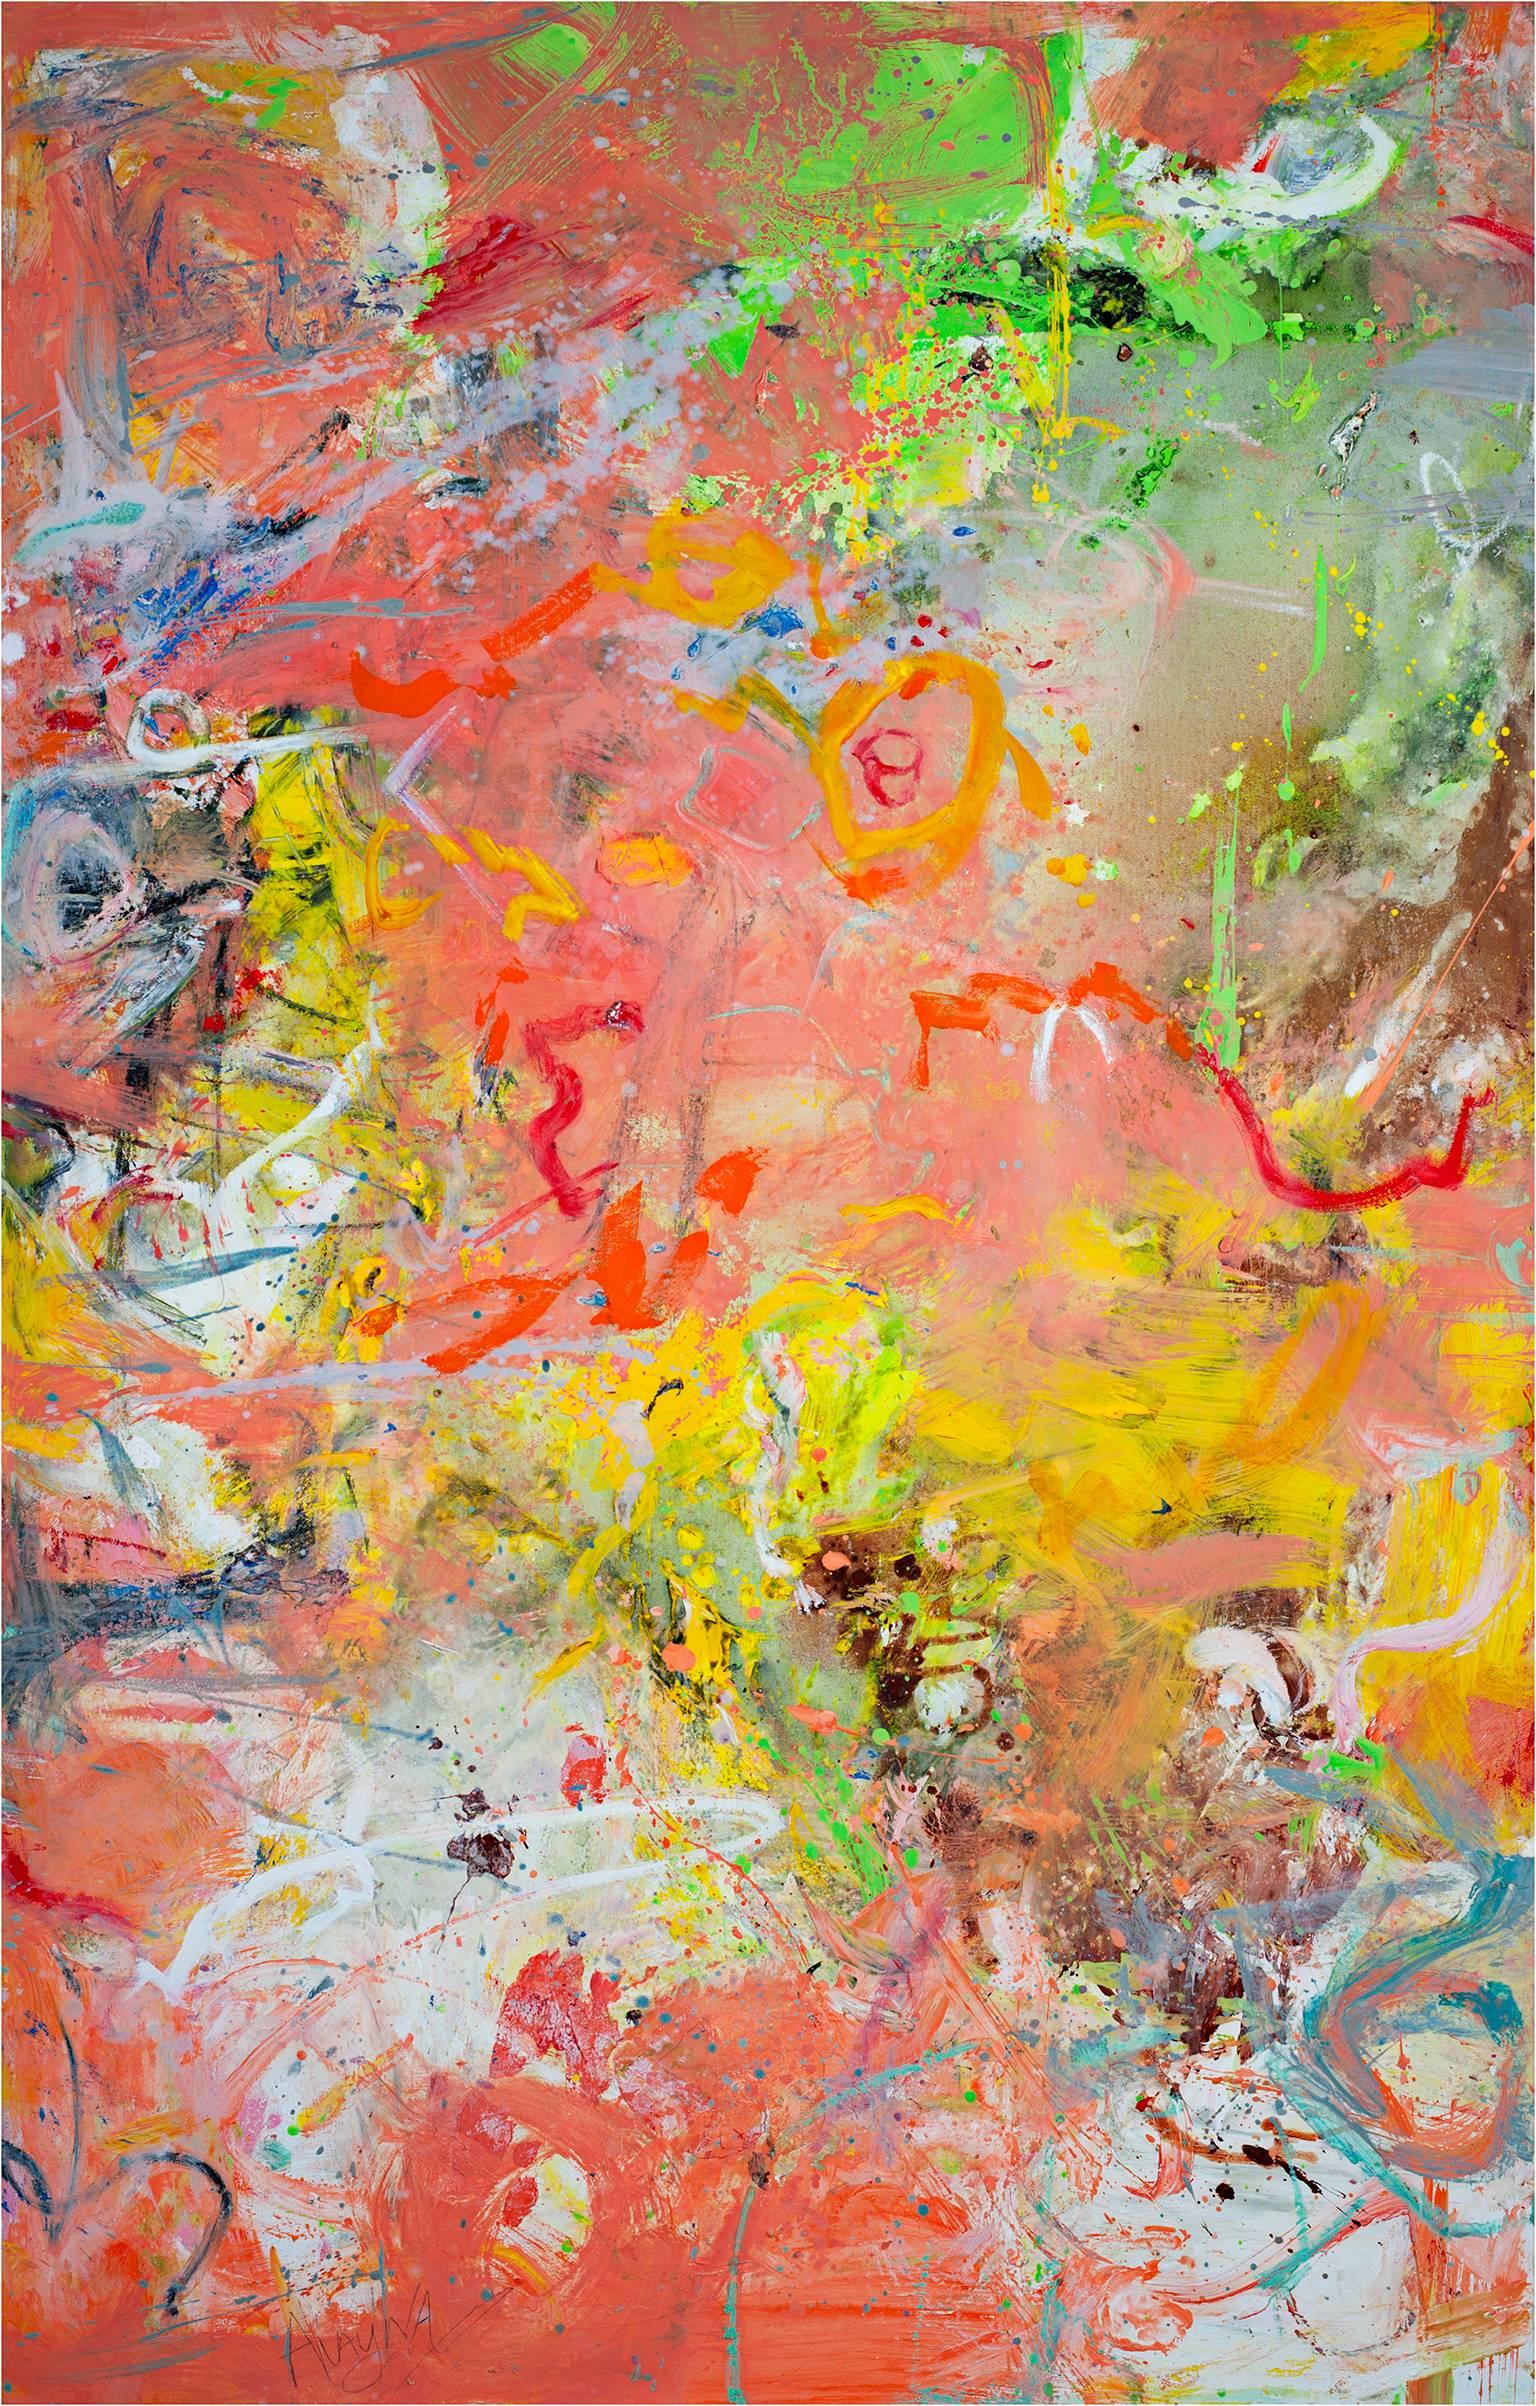 "To Look Again #1" is an original oil painting on canvas by Alayna Rose. The artist signed the painting in the lower left. This painting features a variety of abstract marks in bright colors. 

Artwork Size: 48" x 30"

Artist Bio:

Alayna Rose is a